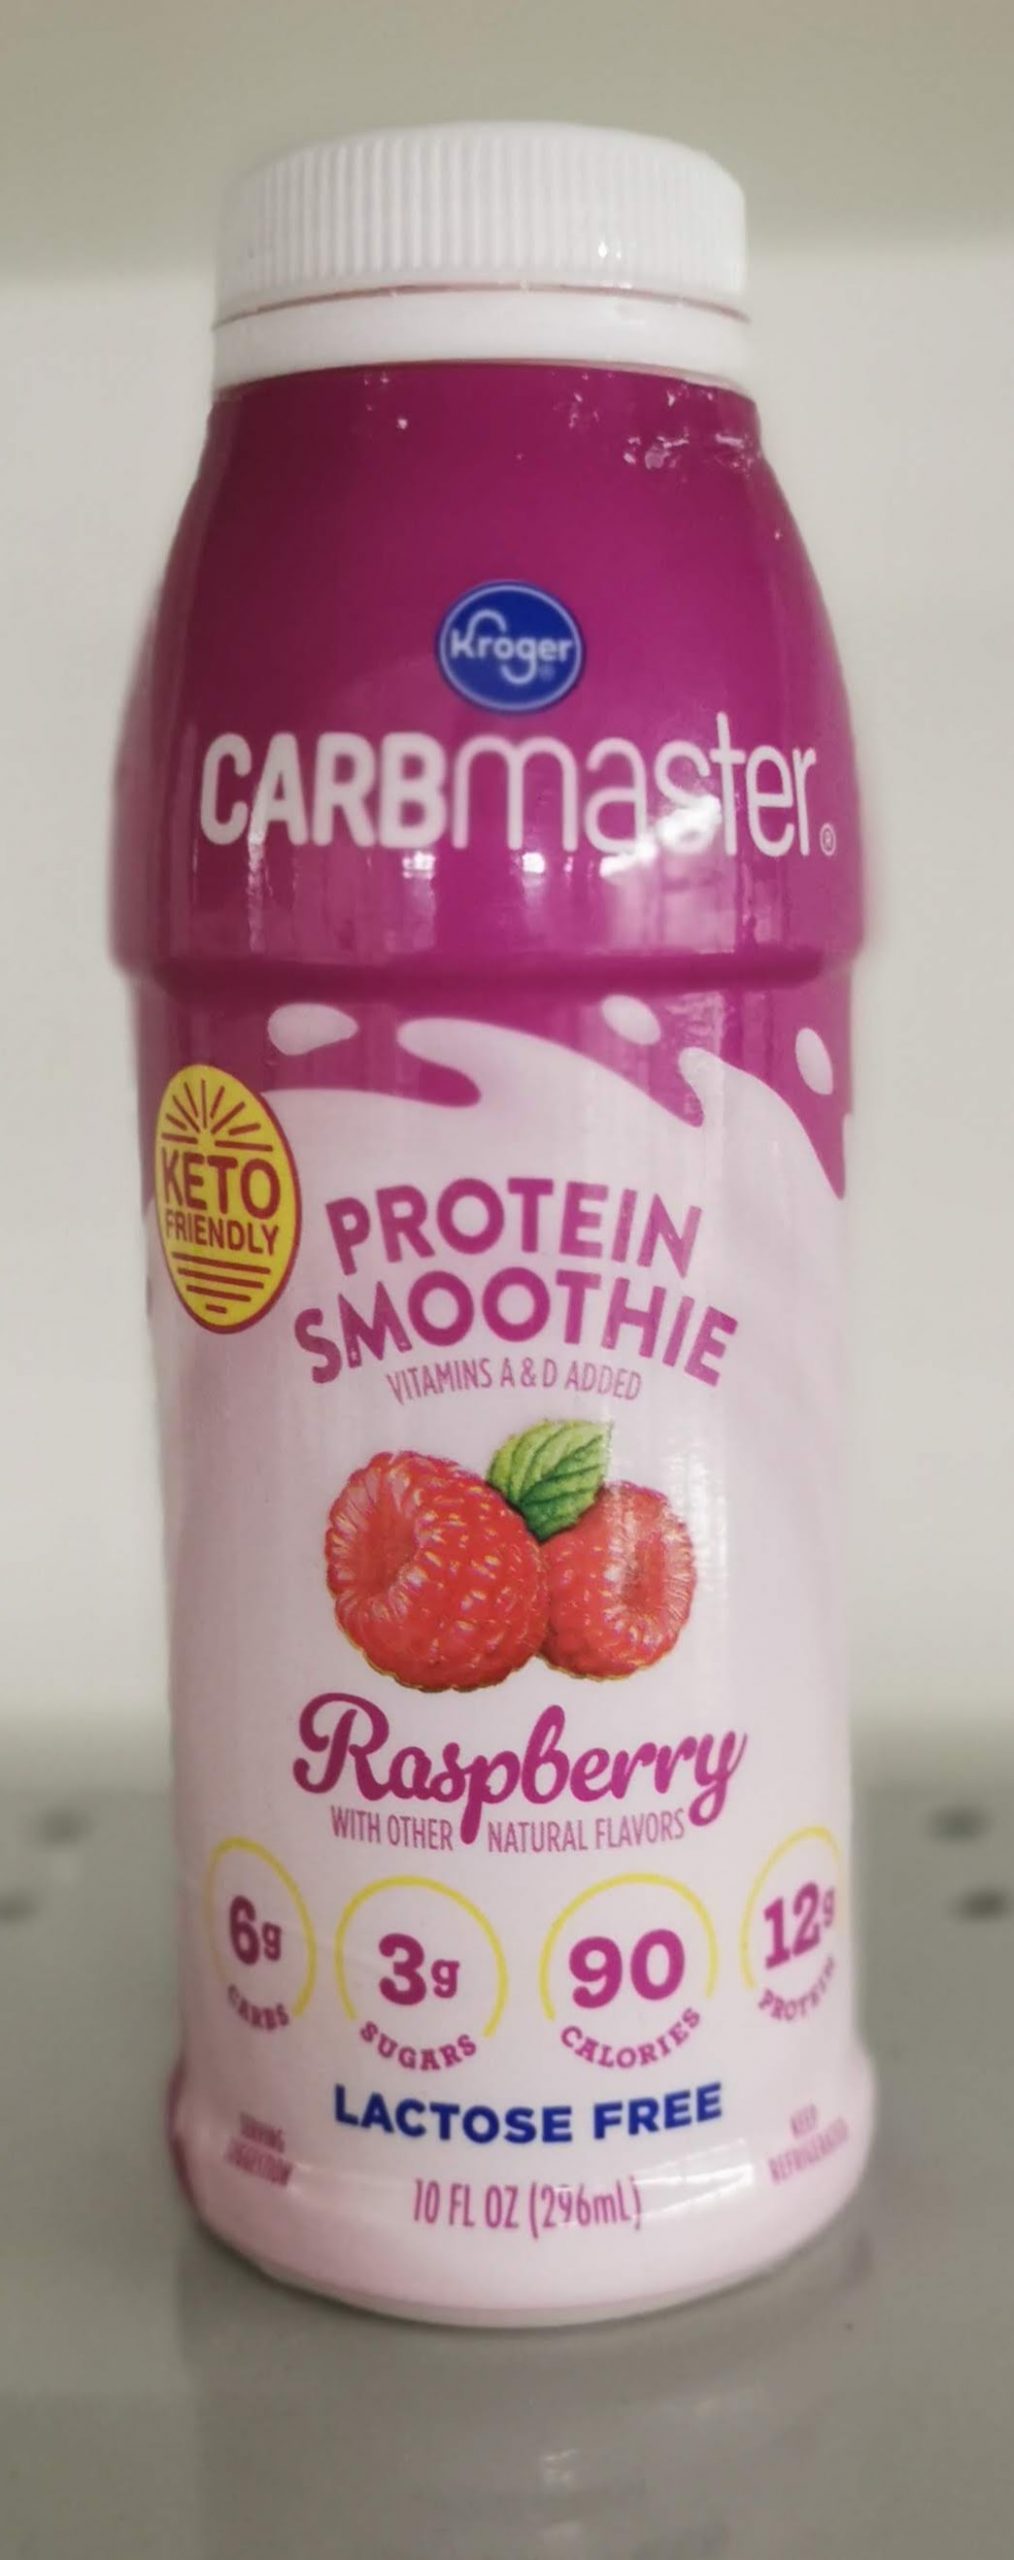 Read more about the article Carbmaster Keto Friendly Raspberry Protein Smoothie (Kroger)